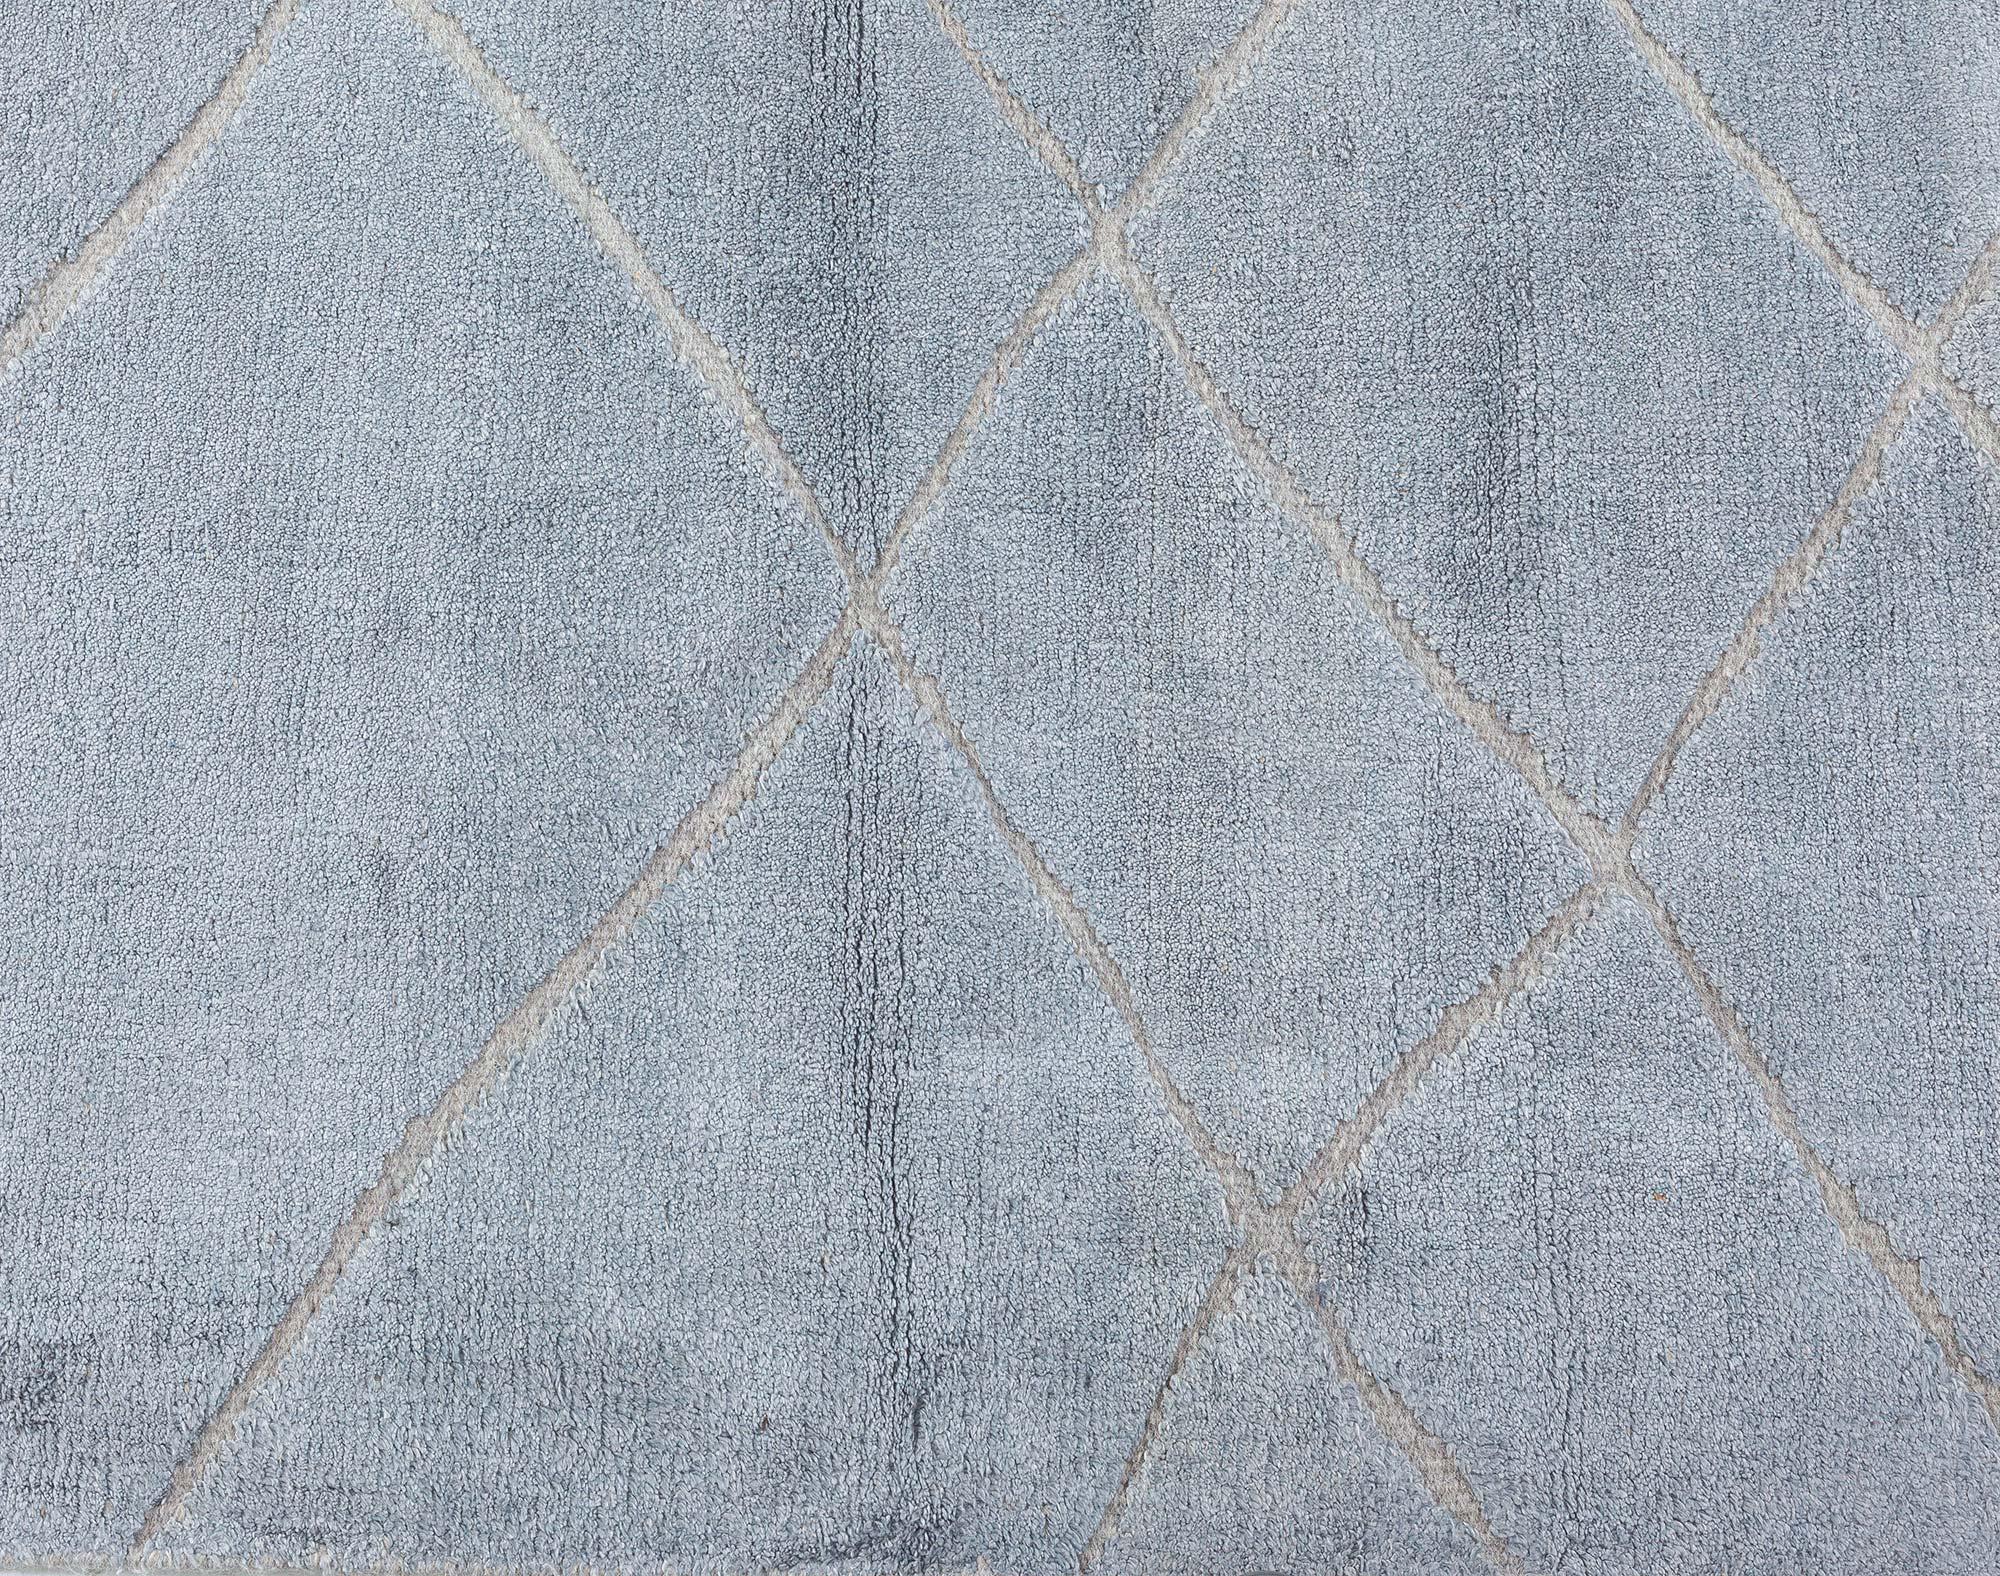 Contemporary High and Low Gray Rug
Size: 5'6